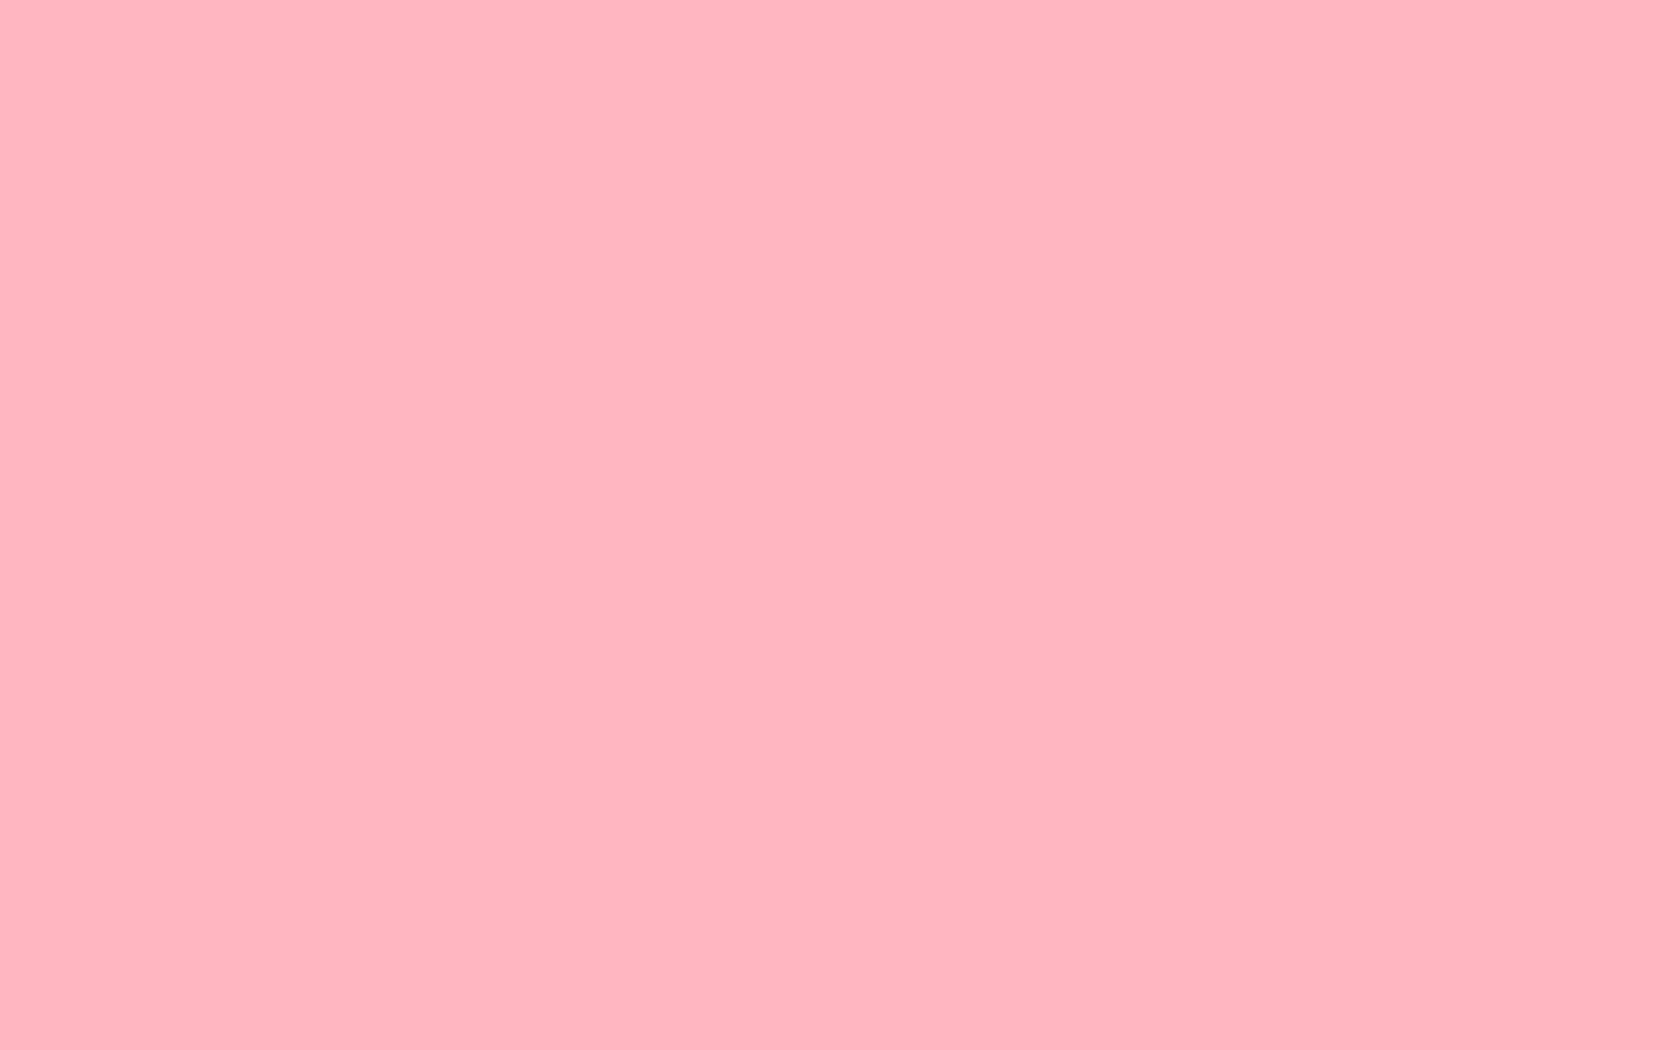 Free 1680x1050 resolution Light Pink solid color background view and 1680x1050